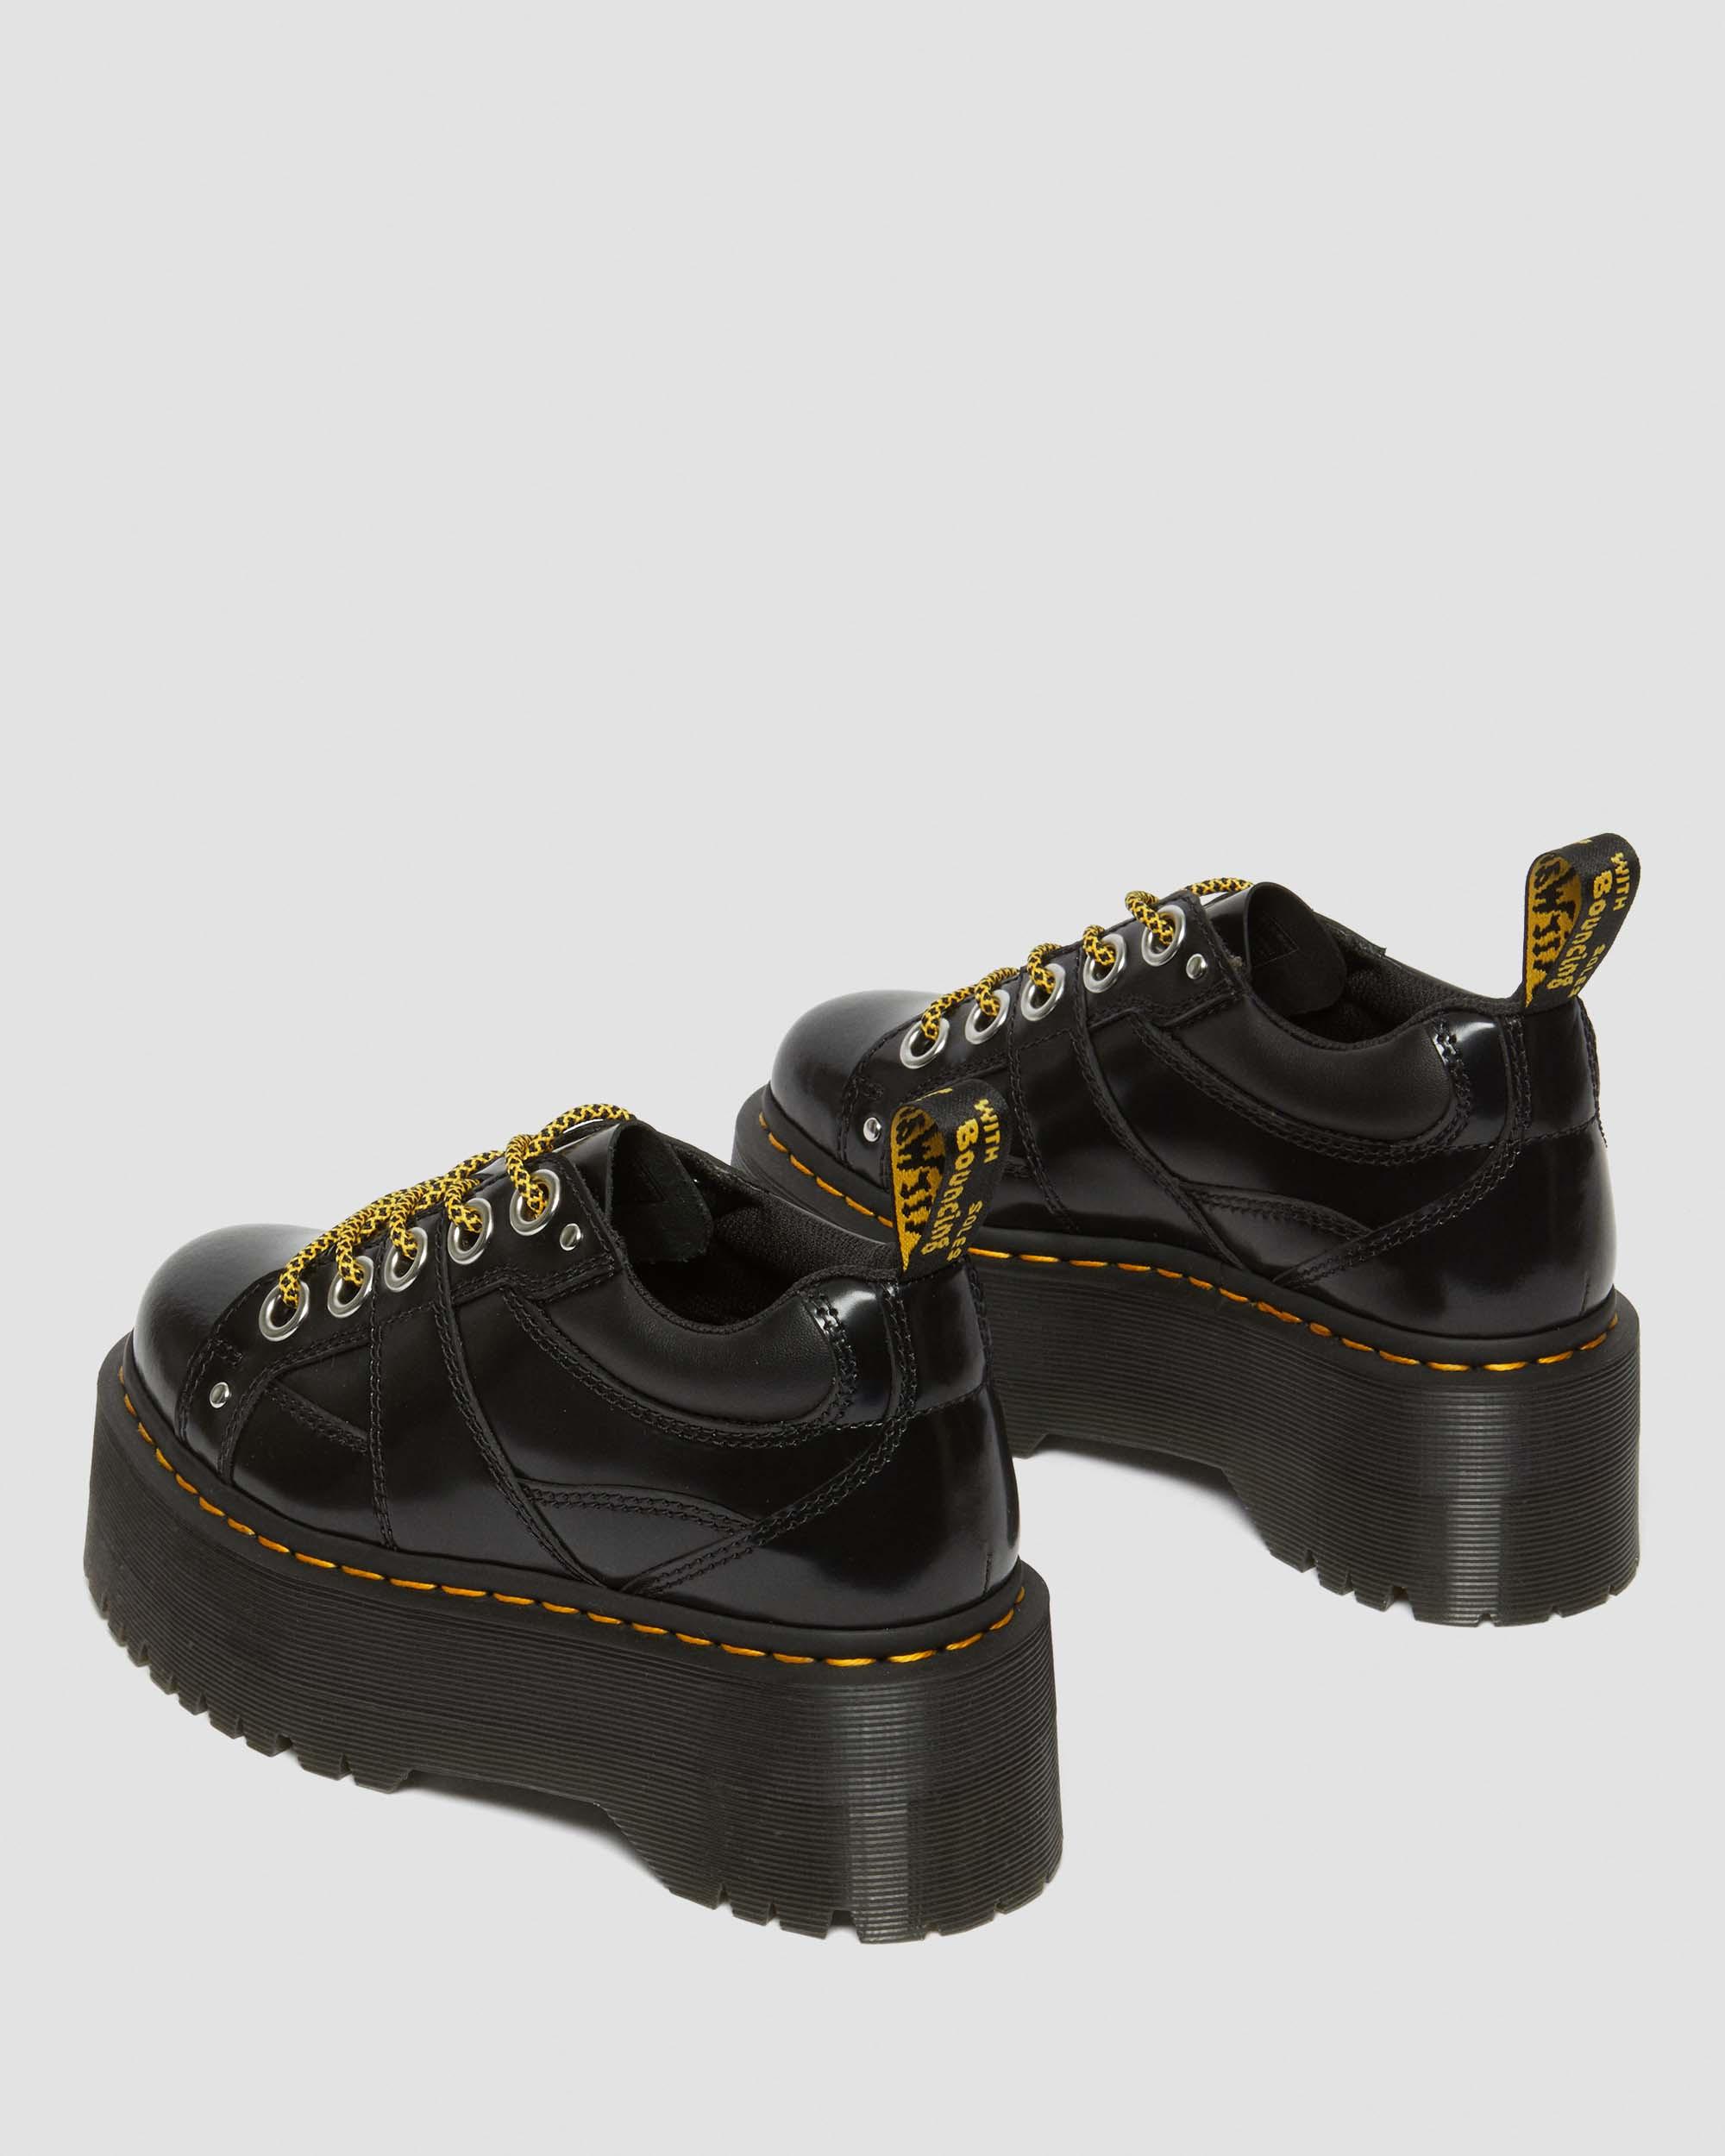 5-Eye Max Buttero Leather Platform Shoes in Black